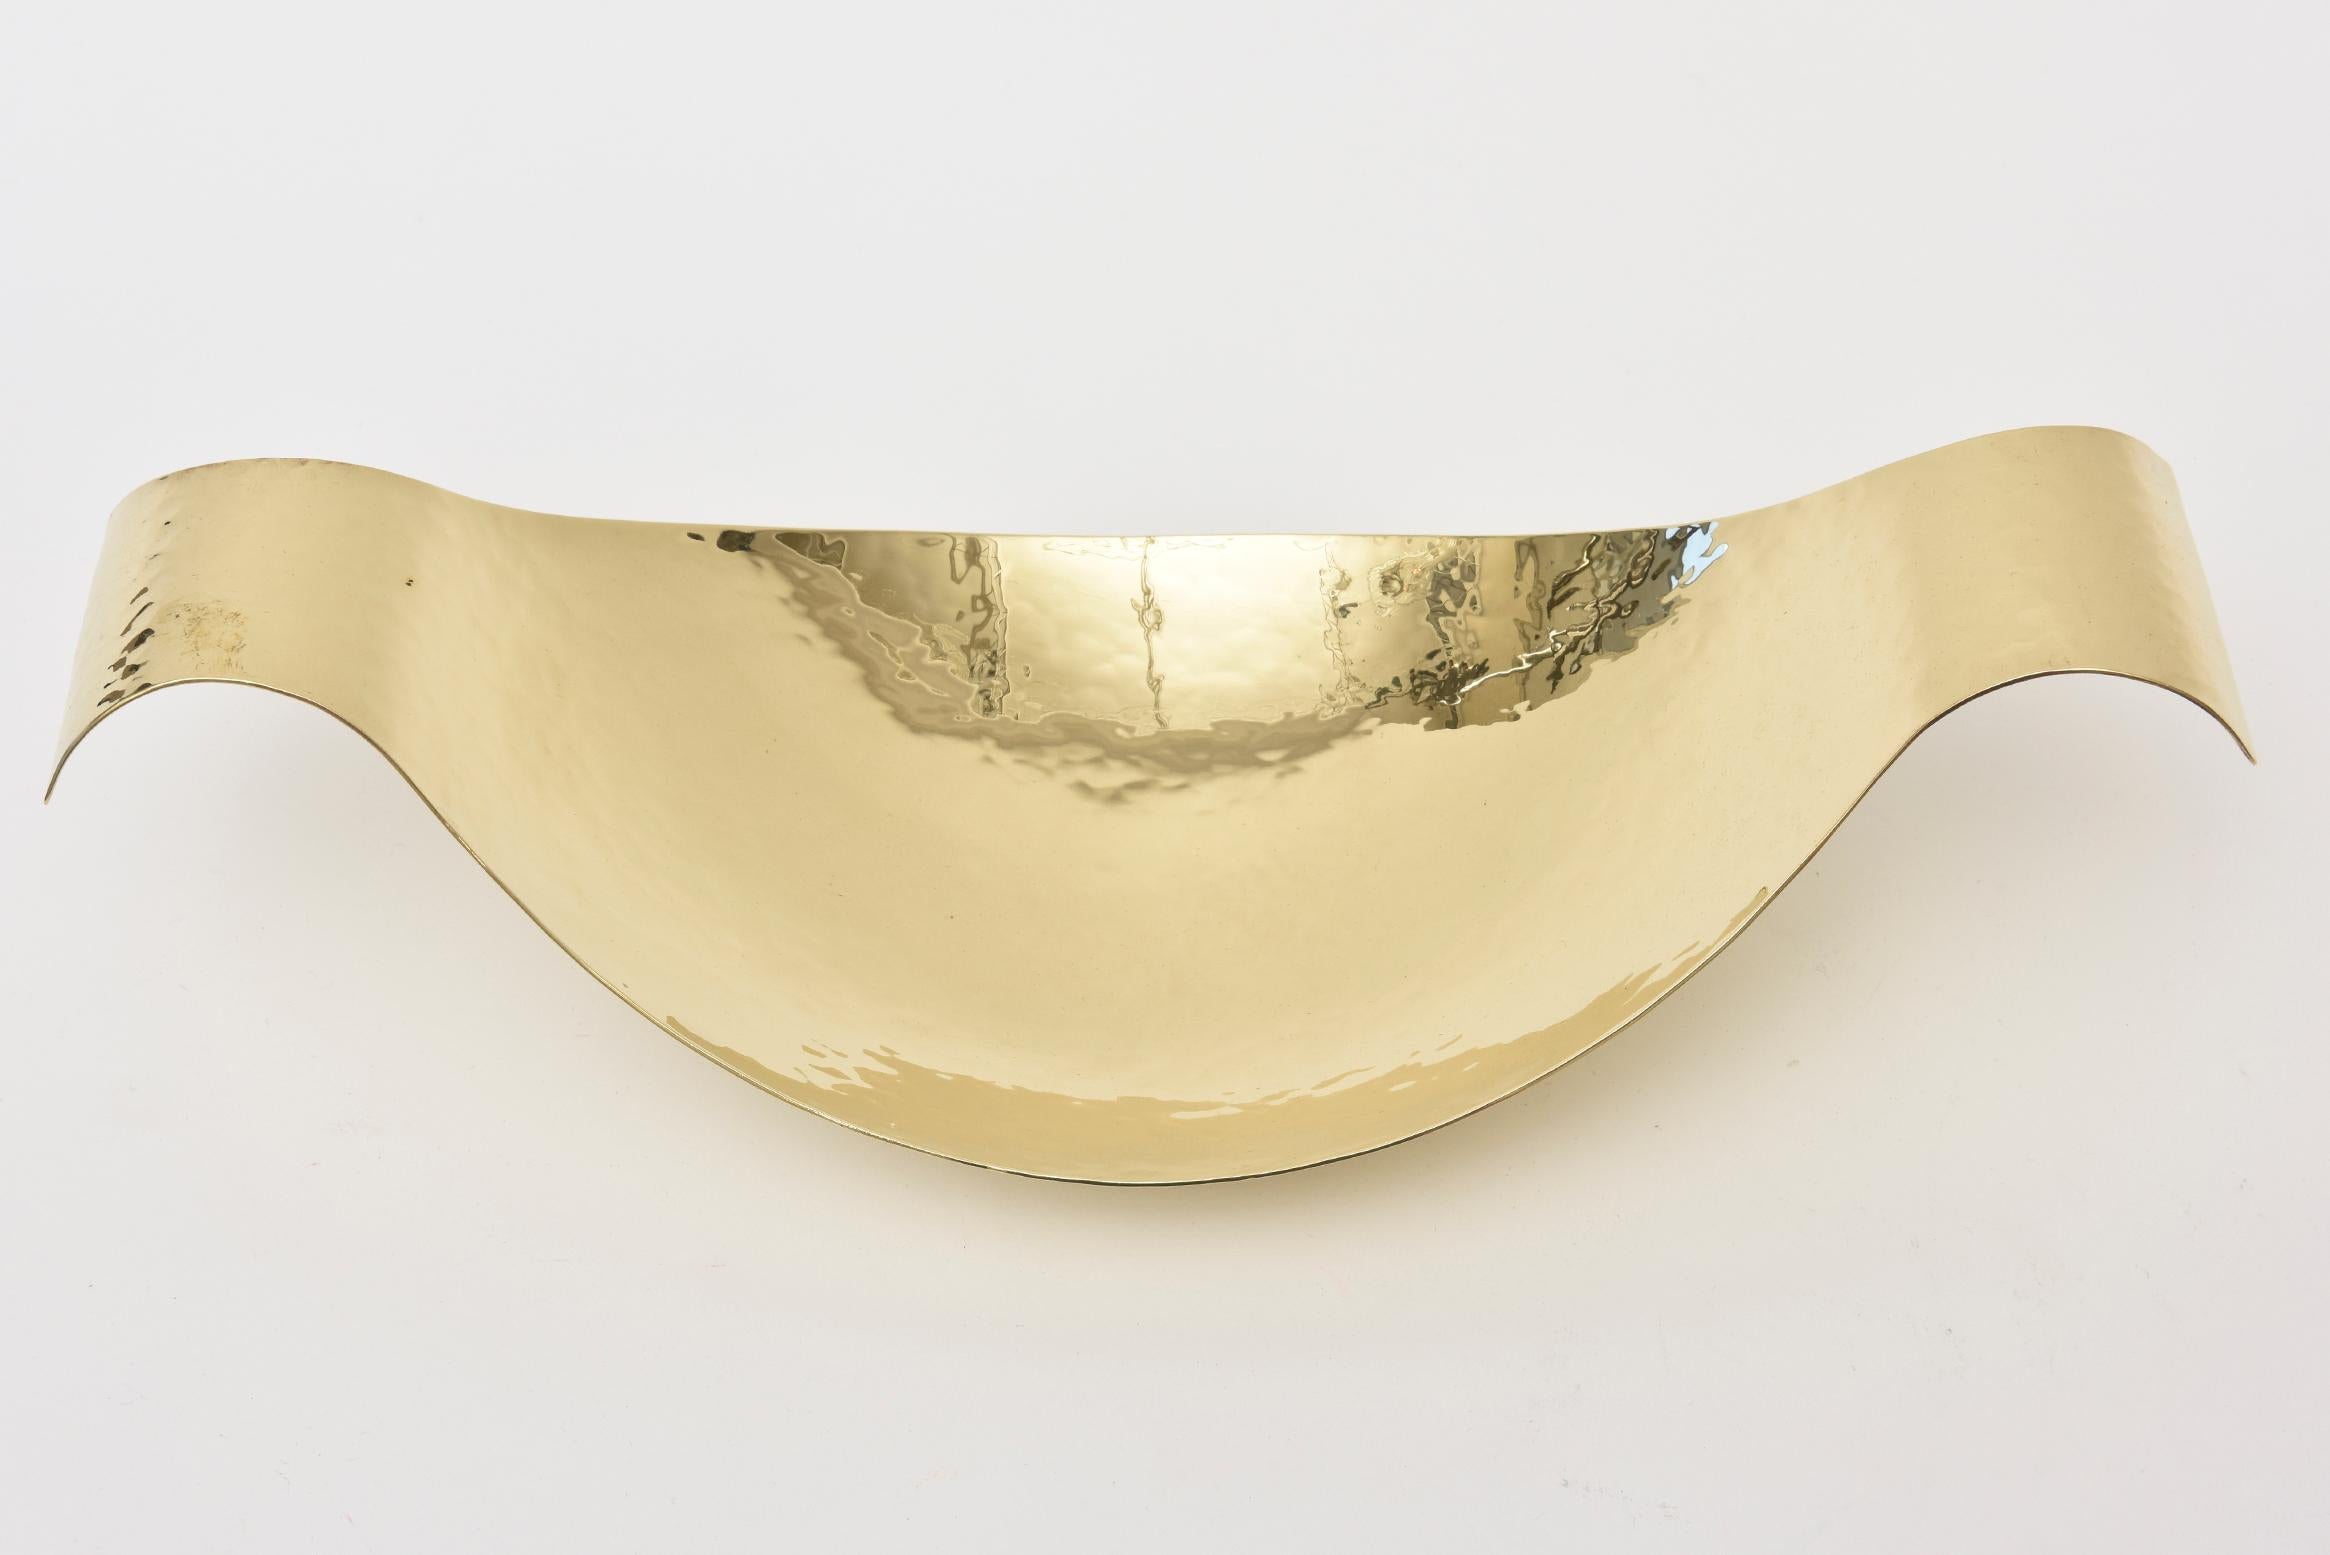 This special and rare Austrian Mid-Century Modern hand-hammered brass polished bowl is attributed to the glorious work of the Werkstatten Hagenauer. It is not marked but of the period, country and Werkstatte. It is a beautiful sculptural entity with